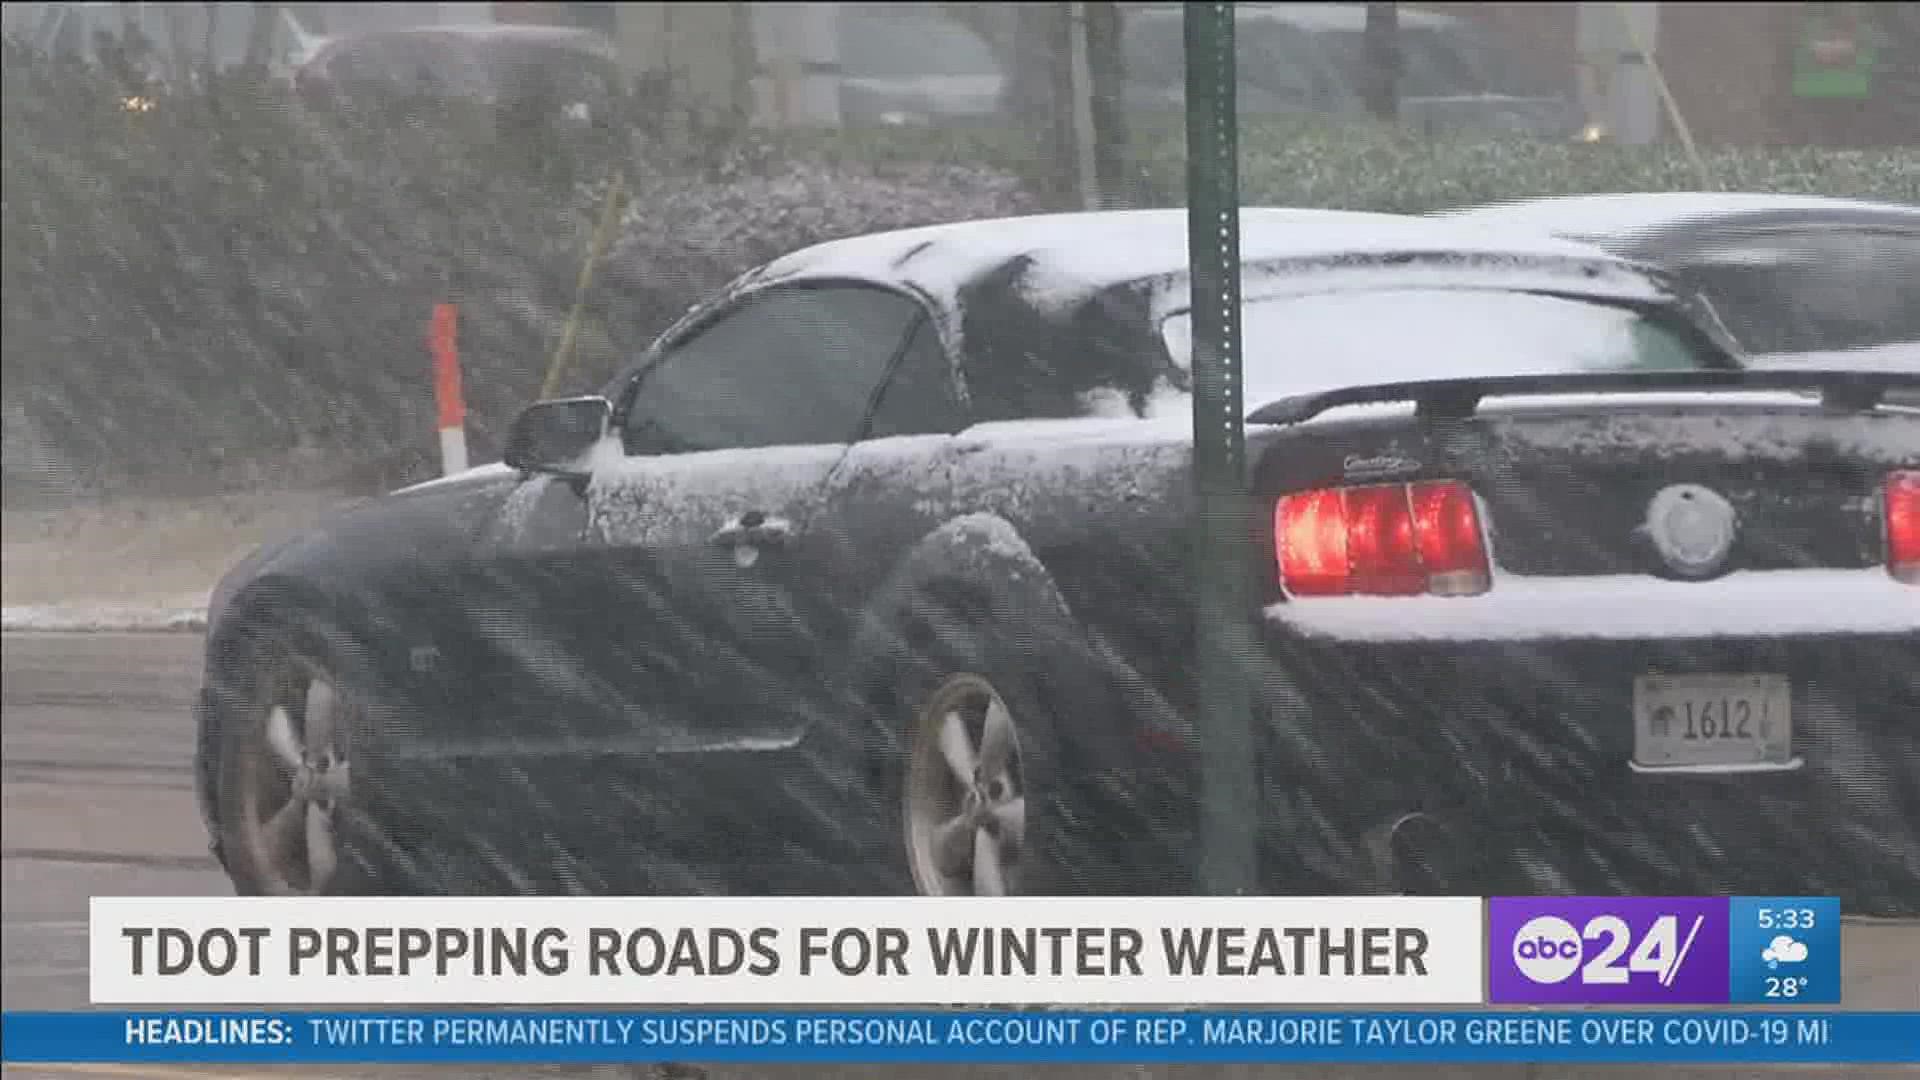 TDOT has been treating major highways to make sure drivers are safe on their morning commute.